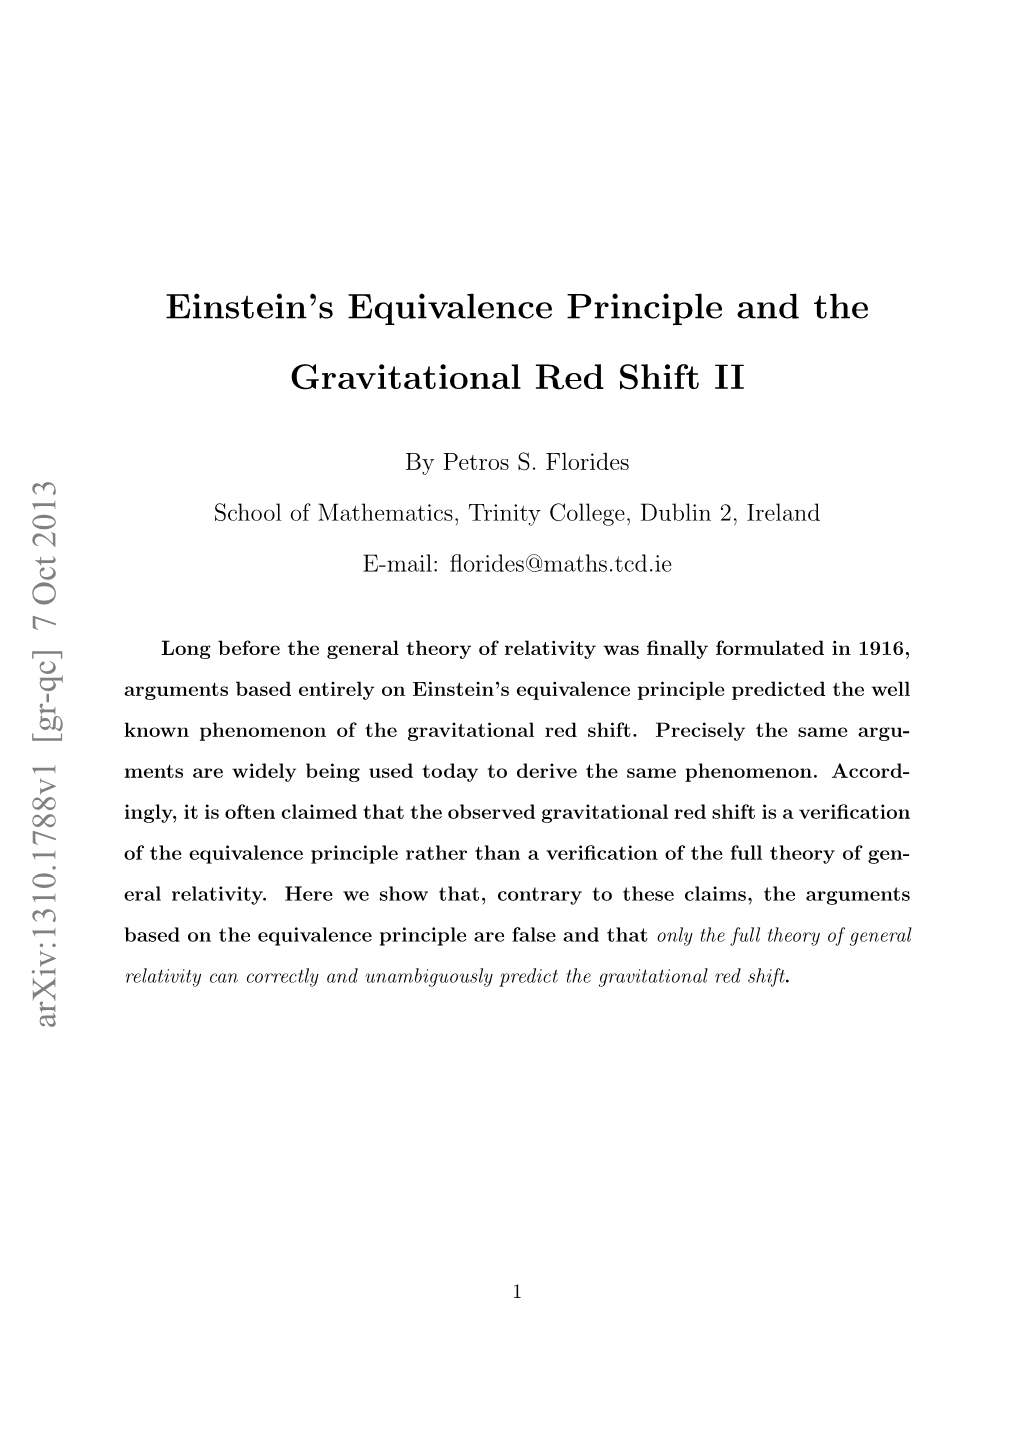 Einstein's Equivalence Principle and the Gravitational Red Shift II Arxiv